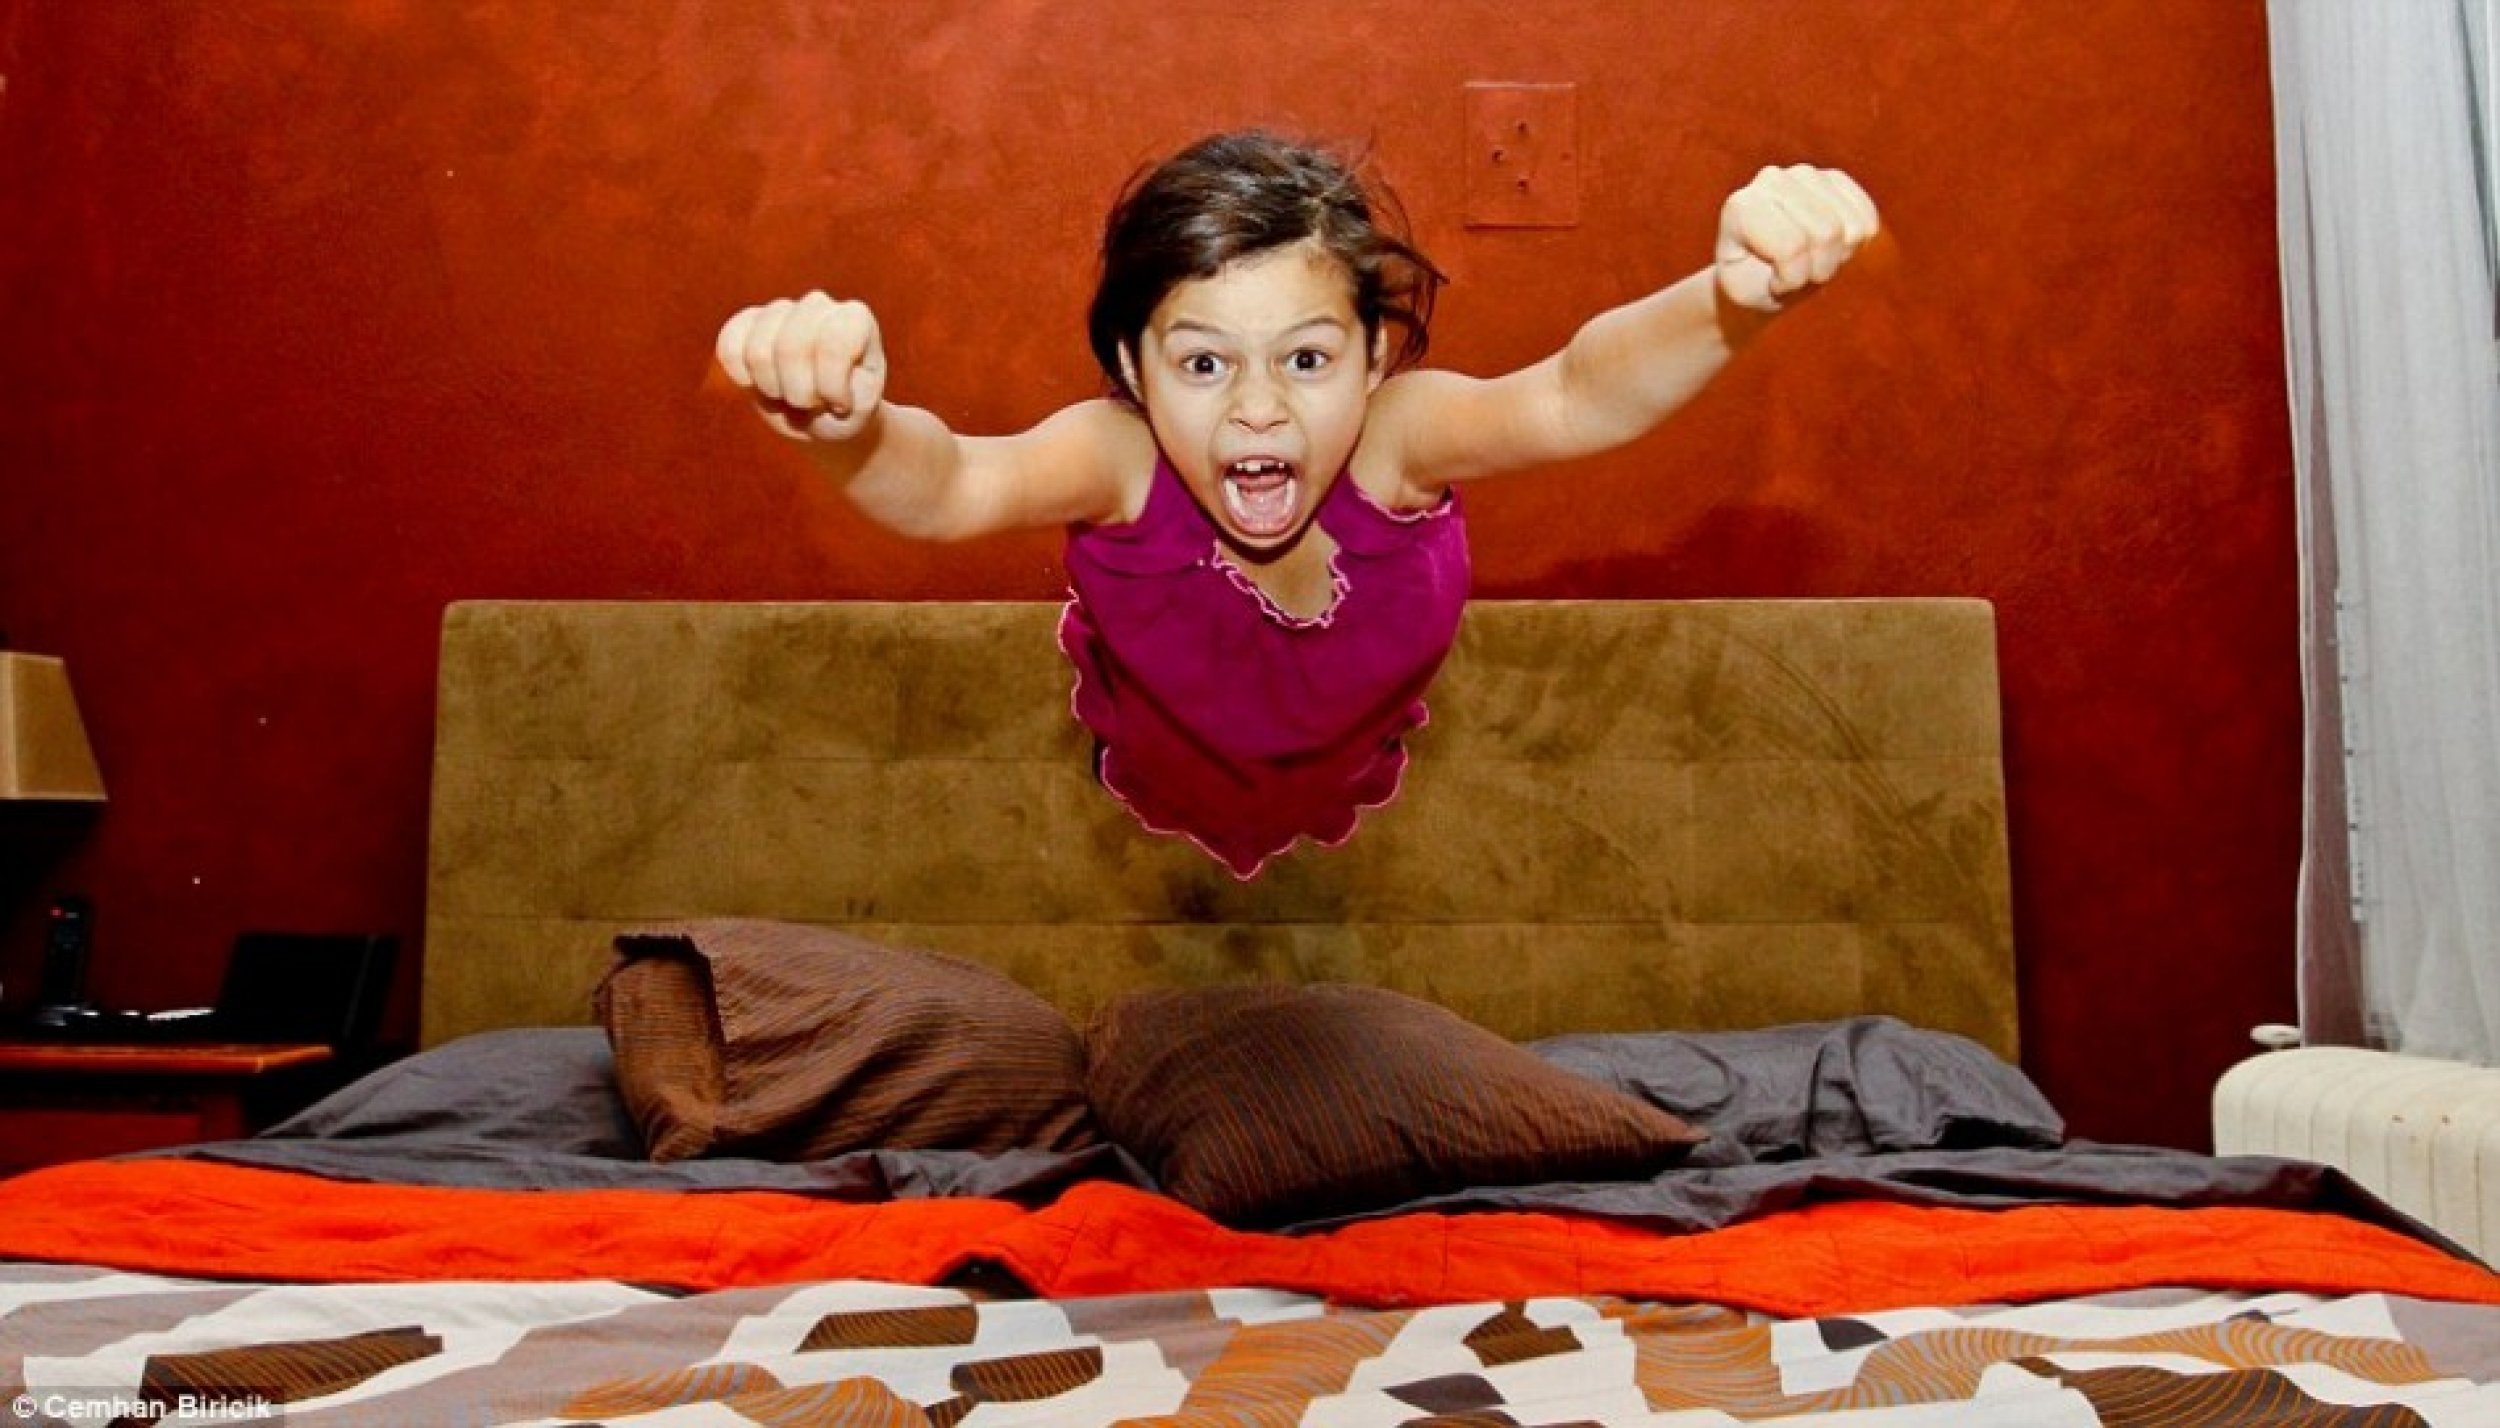 A young girl appears suspended in mid-air in the split second category